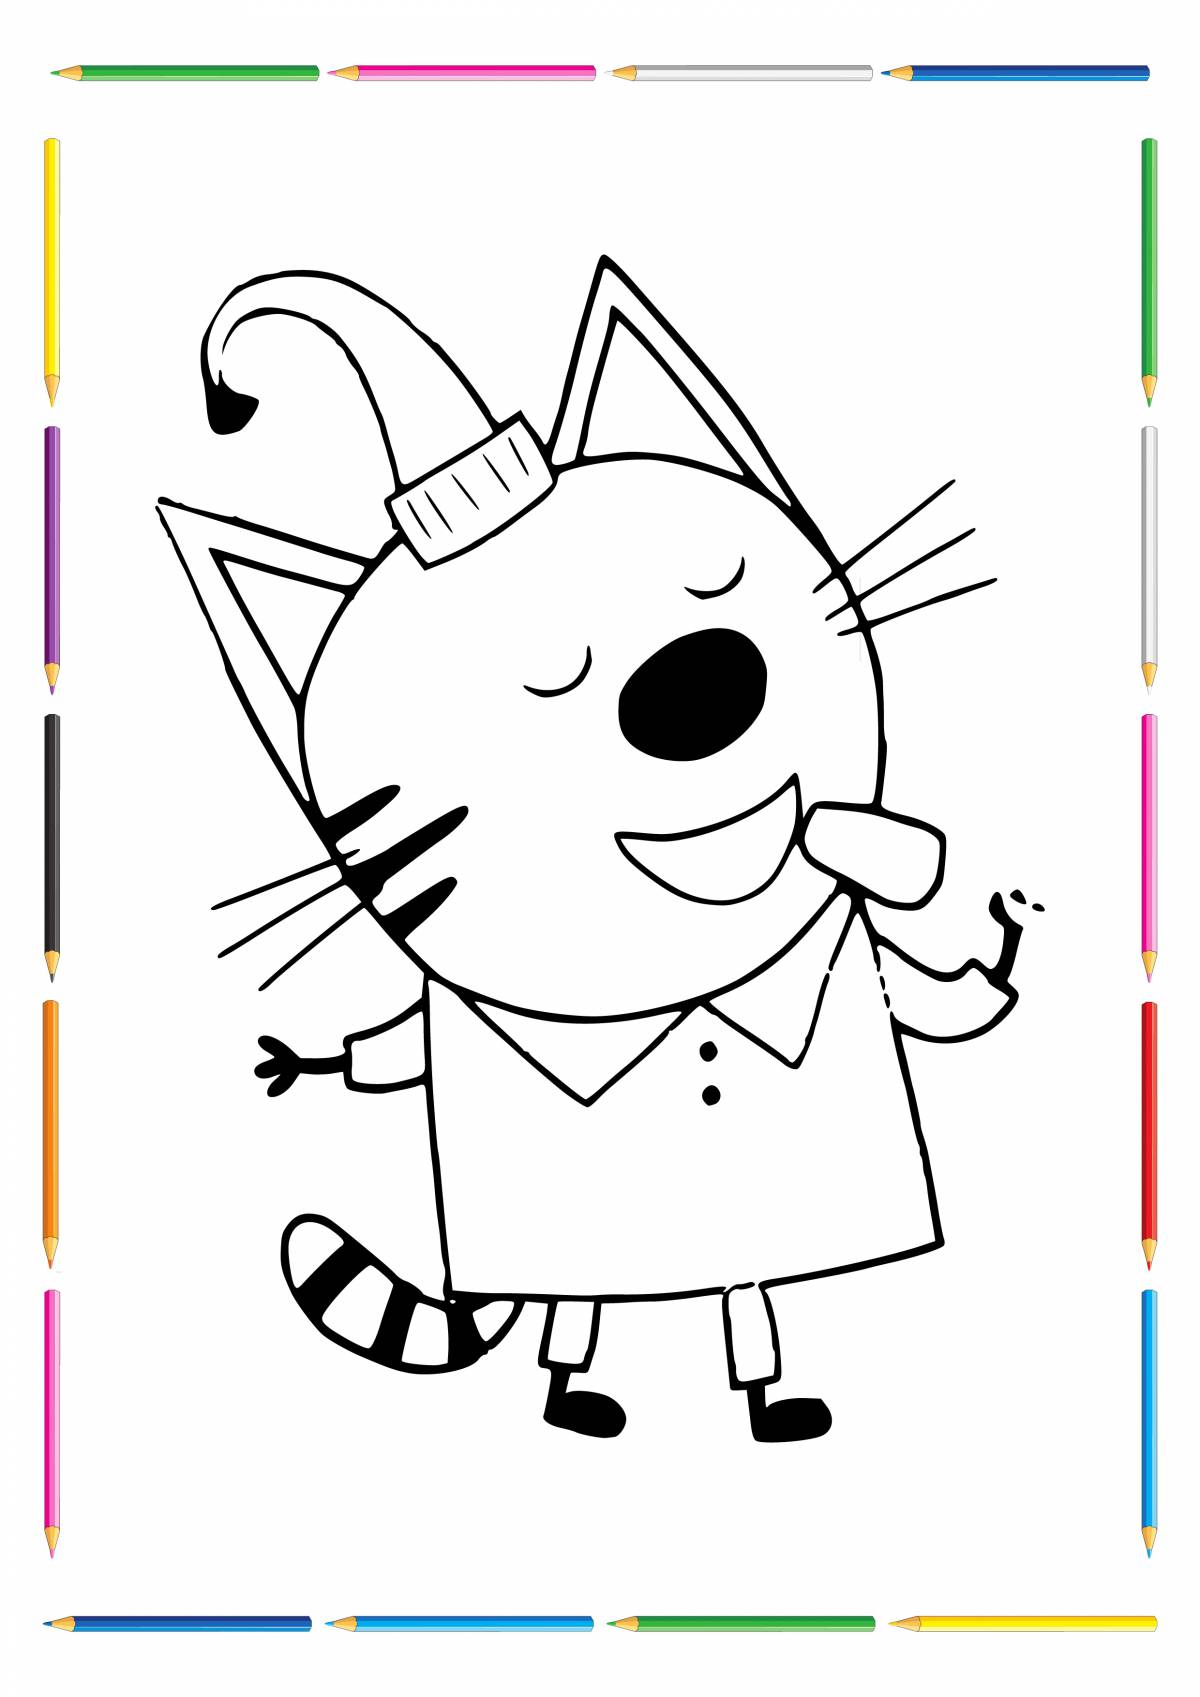 Three cats coloring pages for kids